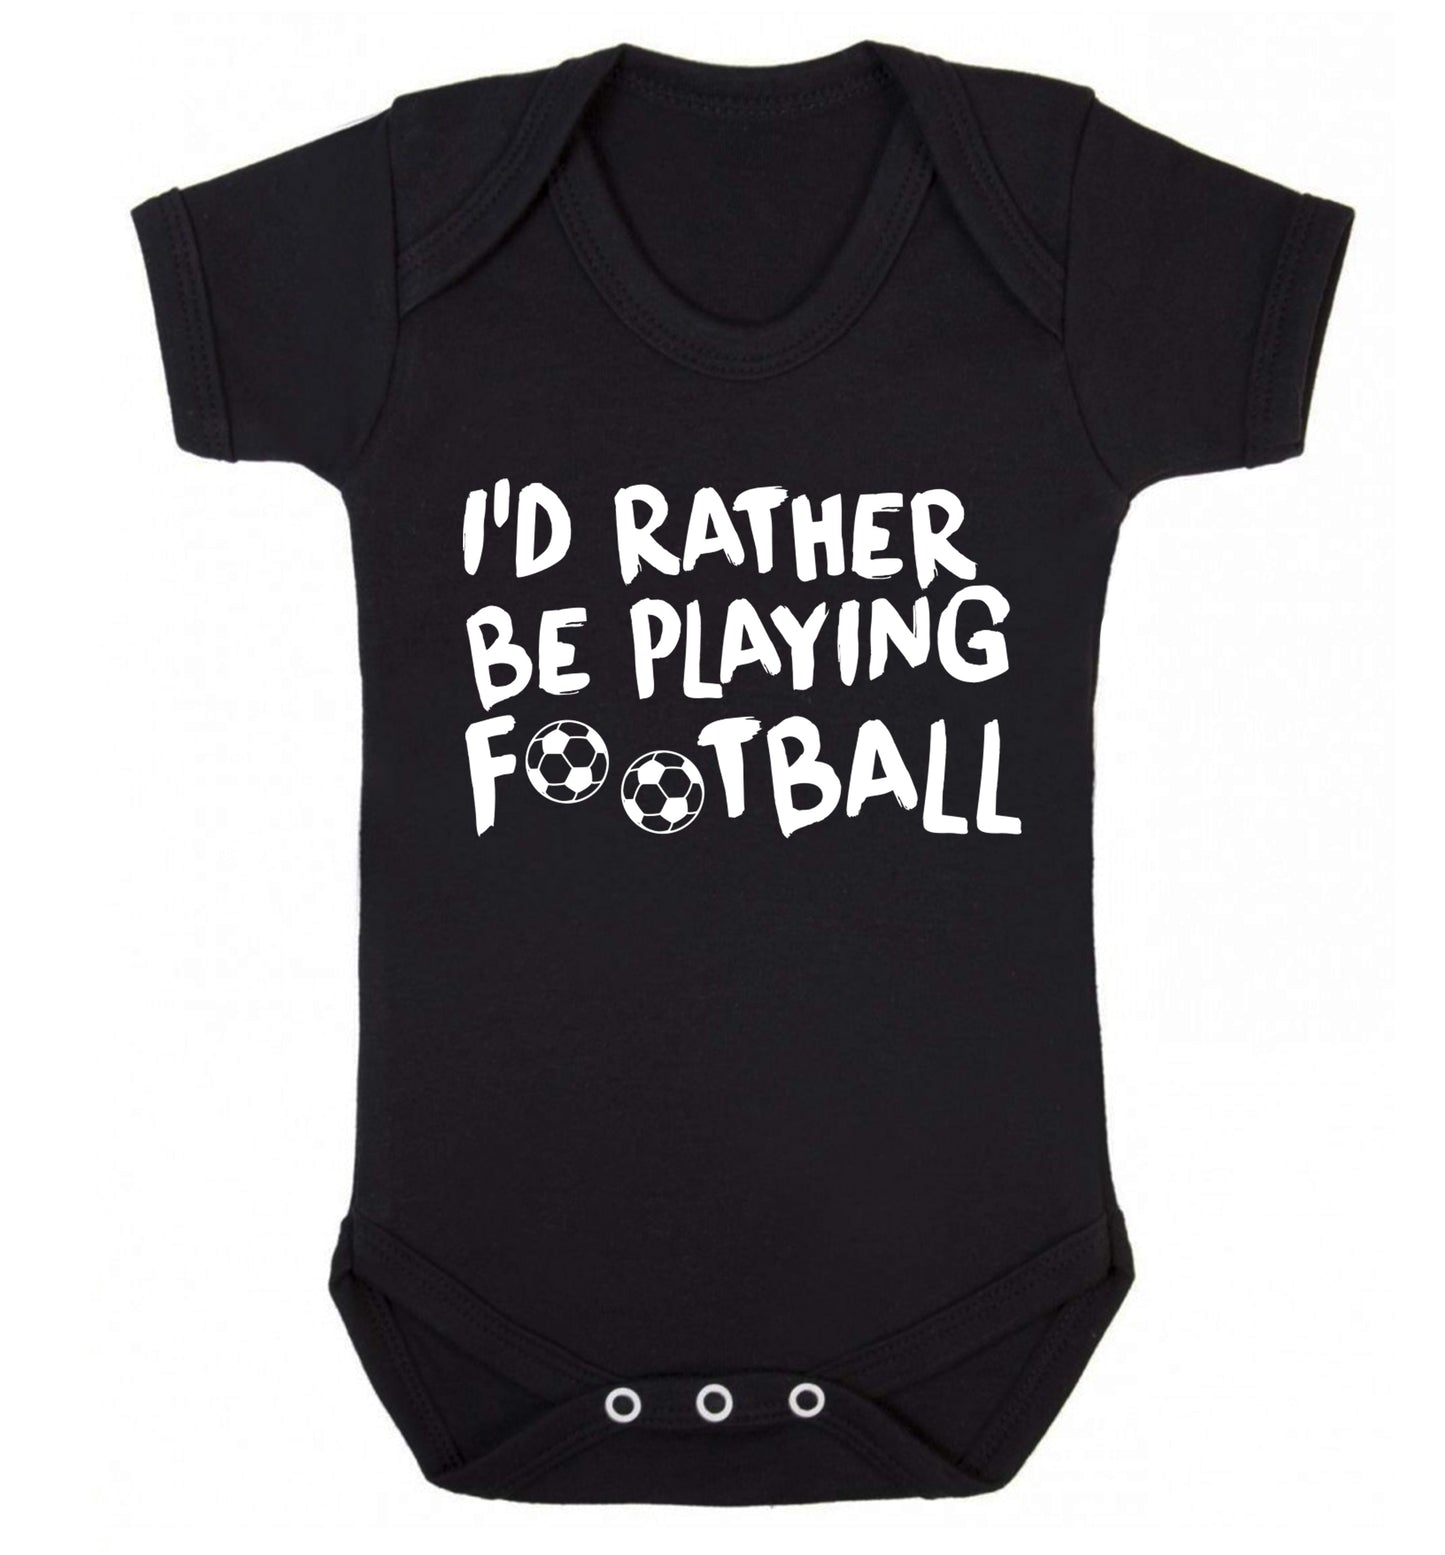 I'd rather be playing football Baby Vest black 18-24 months